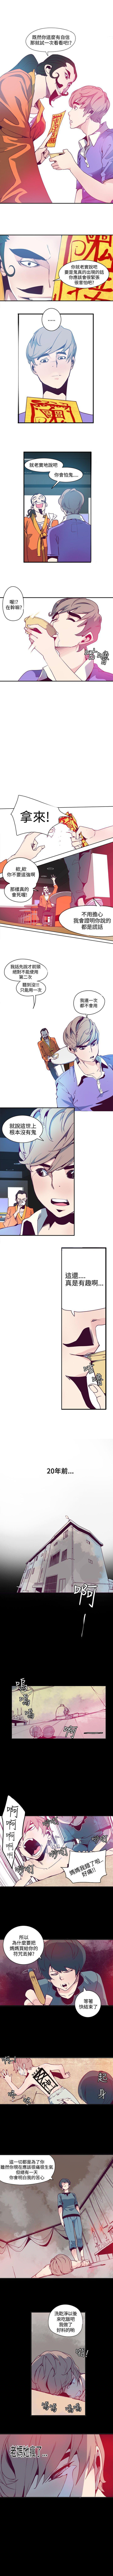 Wet 神級公務員 1-23 Dominant - Page 4